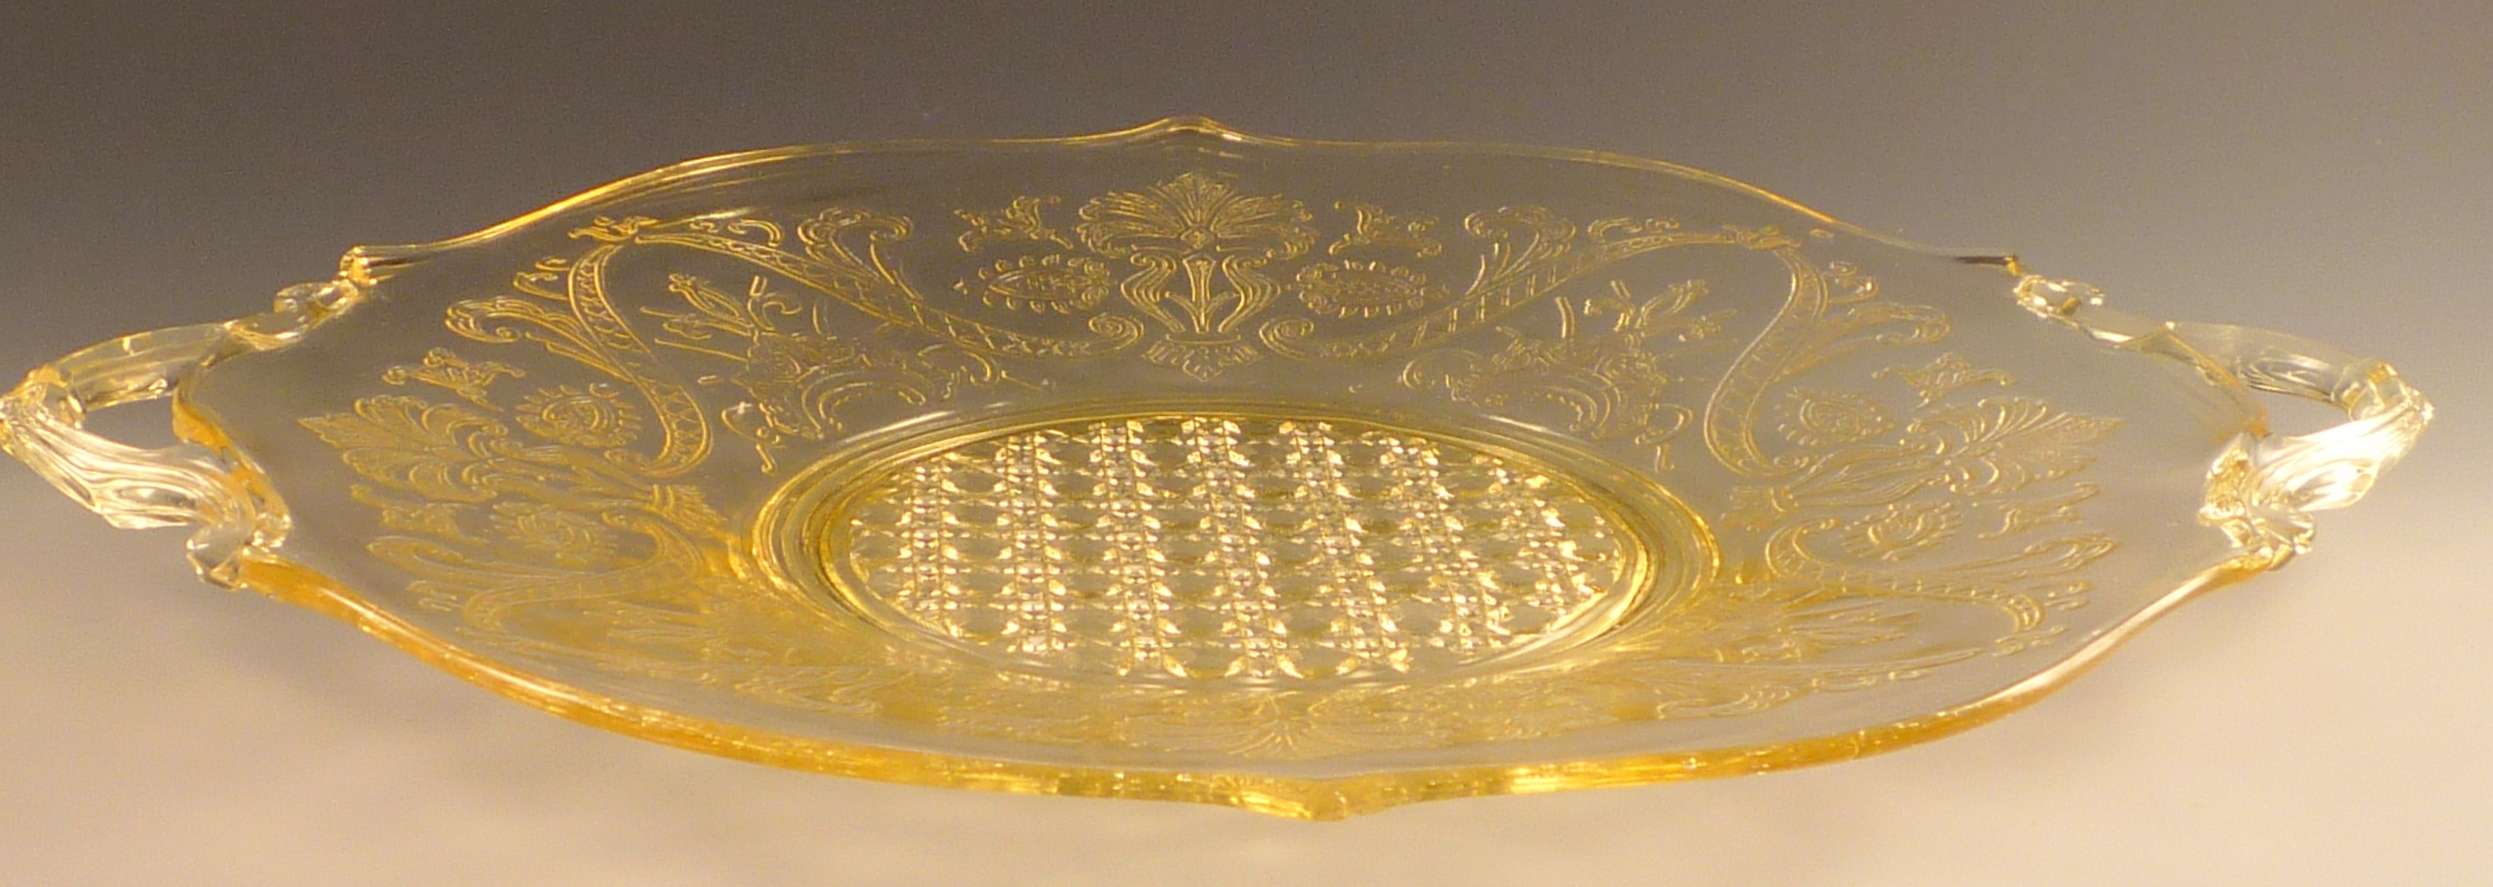 royal lace depression glass was one of the most sought after glassware duri...